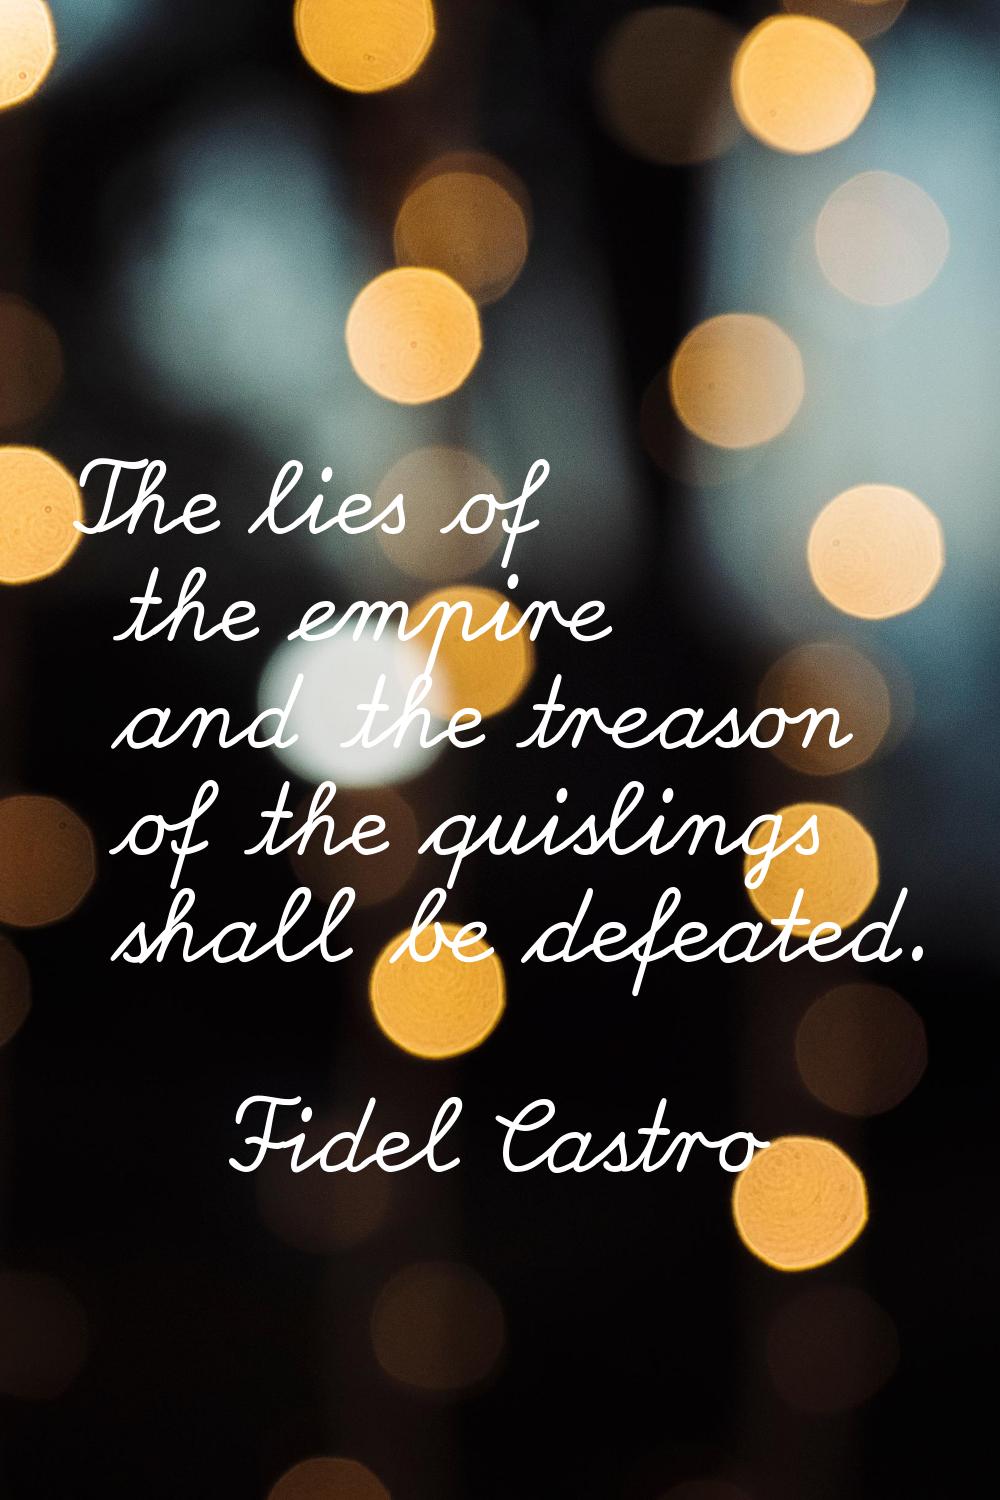 The lies of the empire and the treason of the quislings shall be defeated.